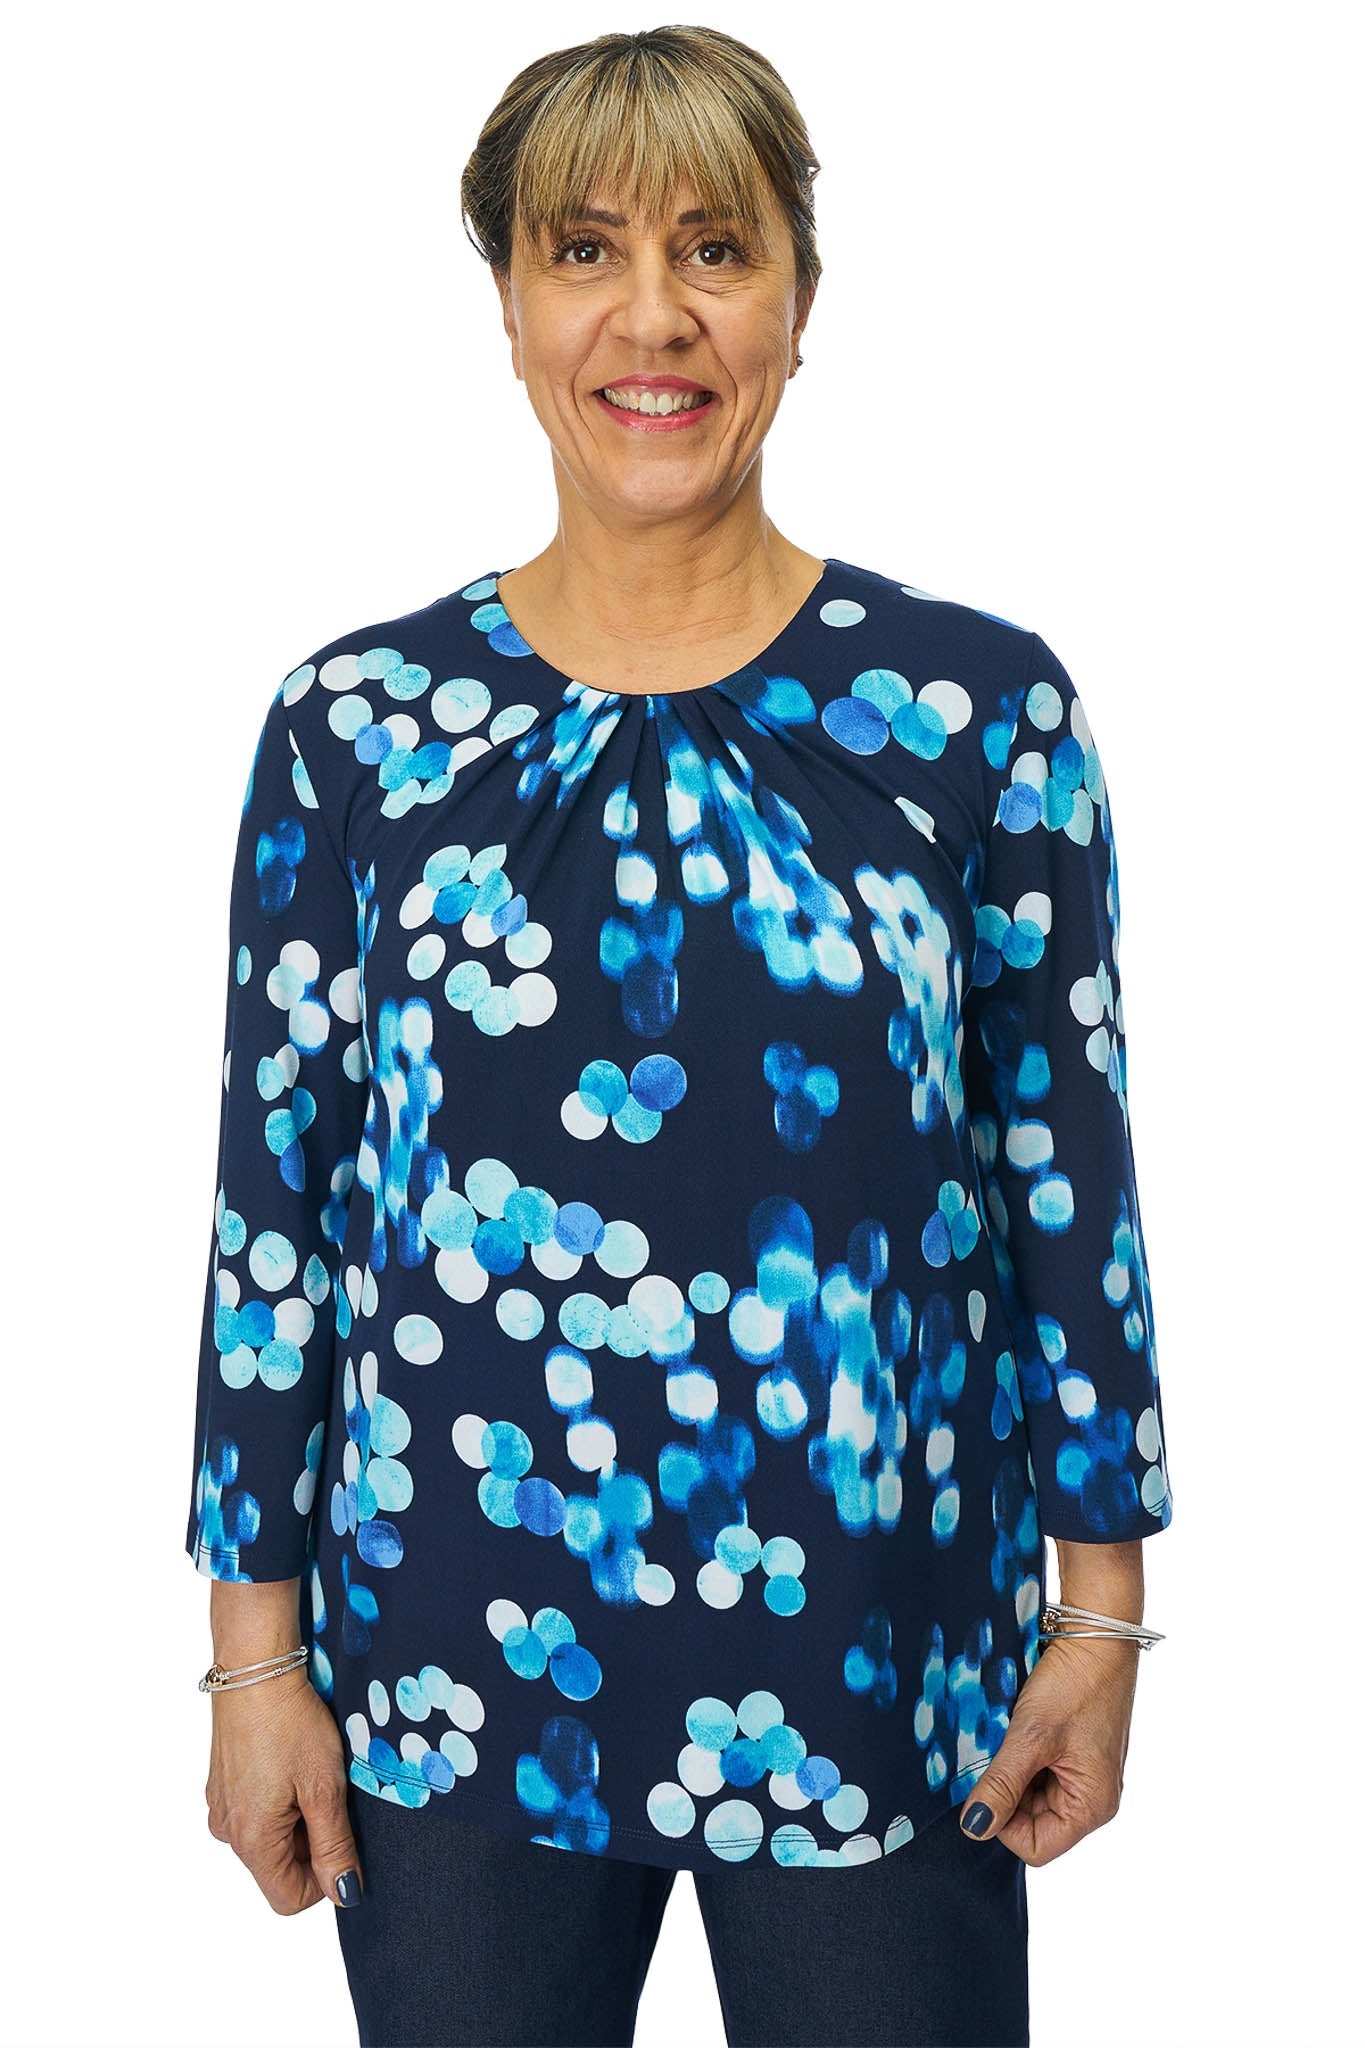 Fashionable Adaptive Top for Women | Art in Aging